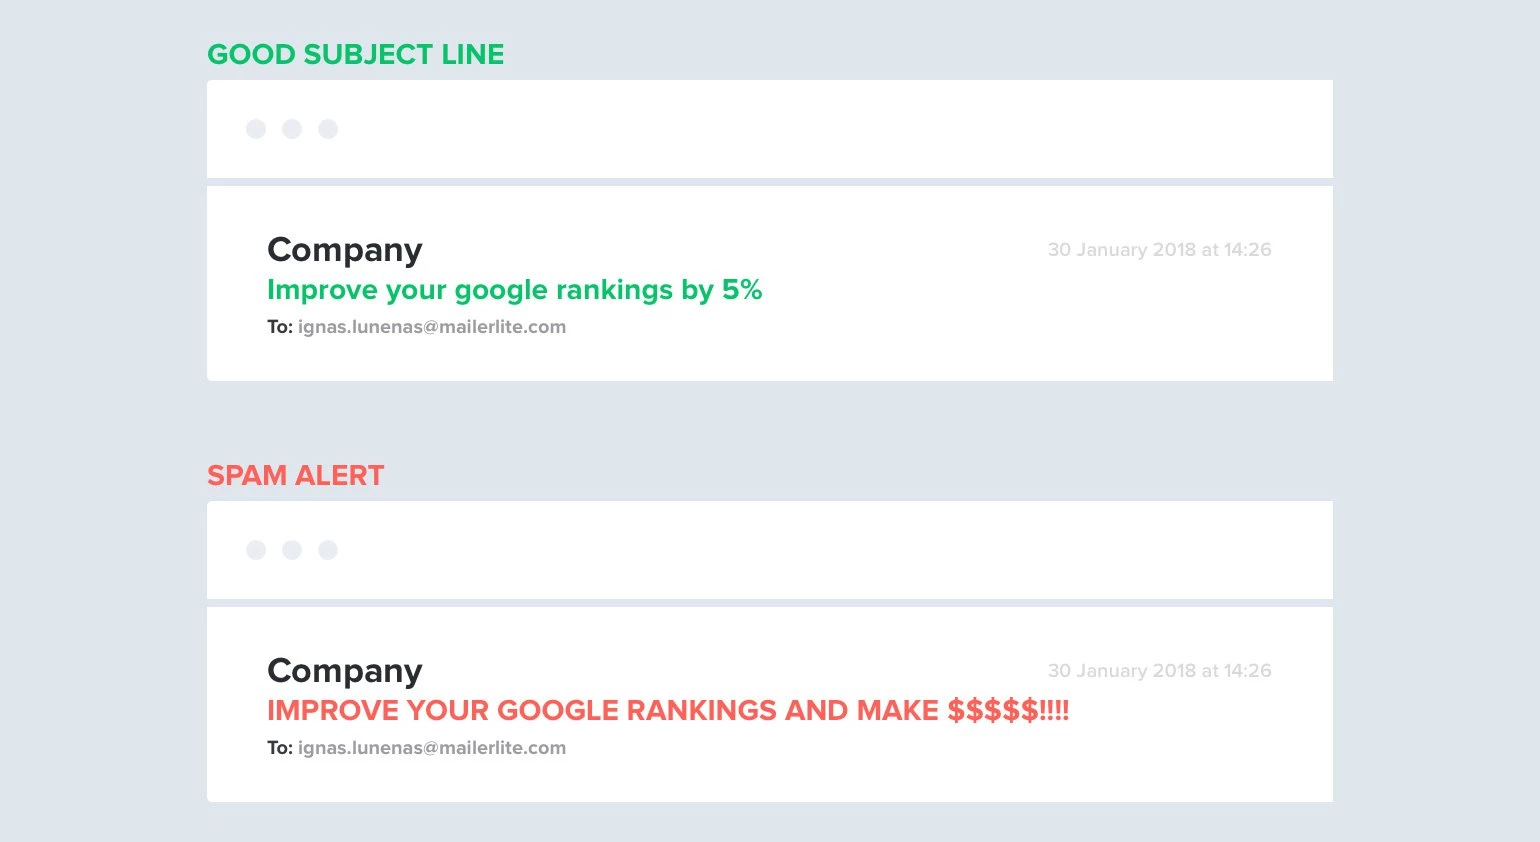 email subject line comparison between good and spammy - MailerLite